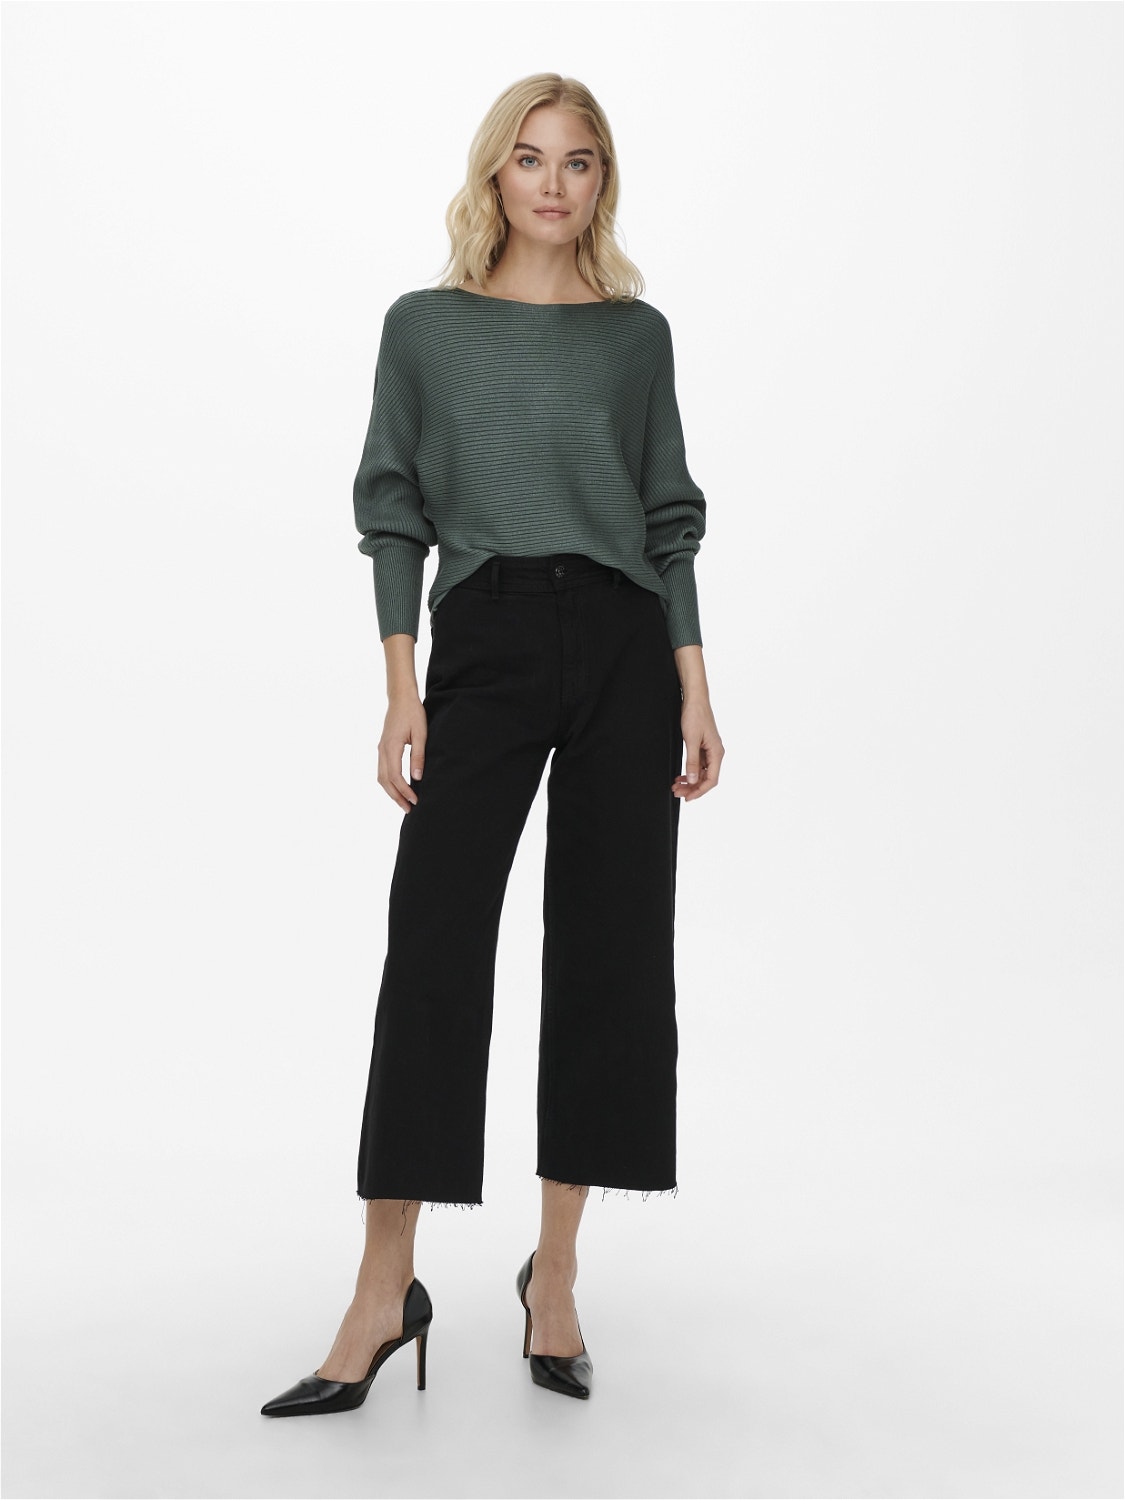 ONLY Pull-overs Col bateau Bas hauts -Balsam Green - 15226298